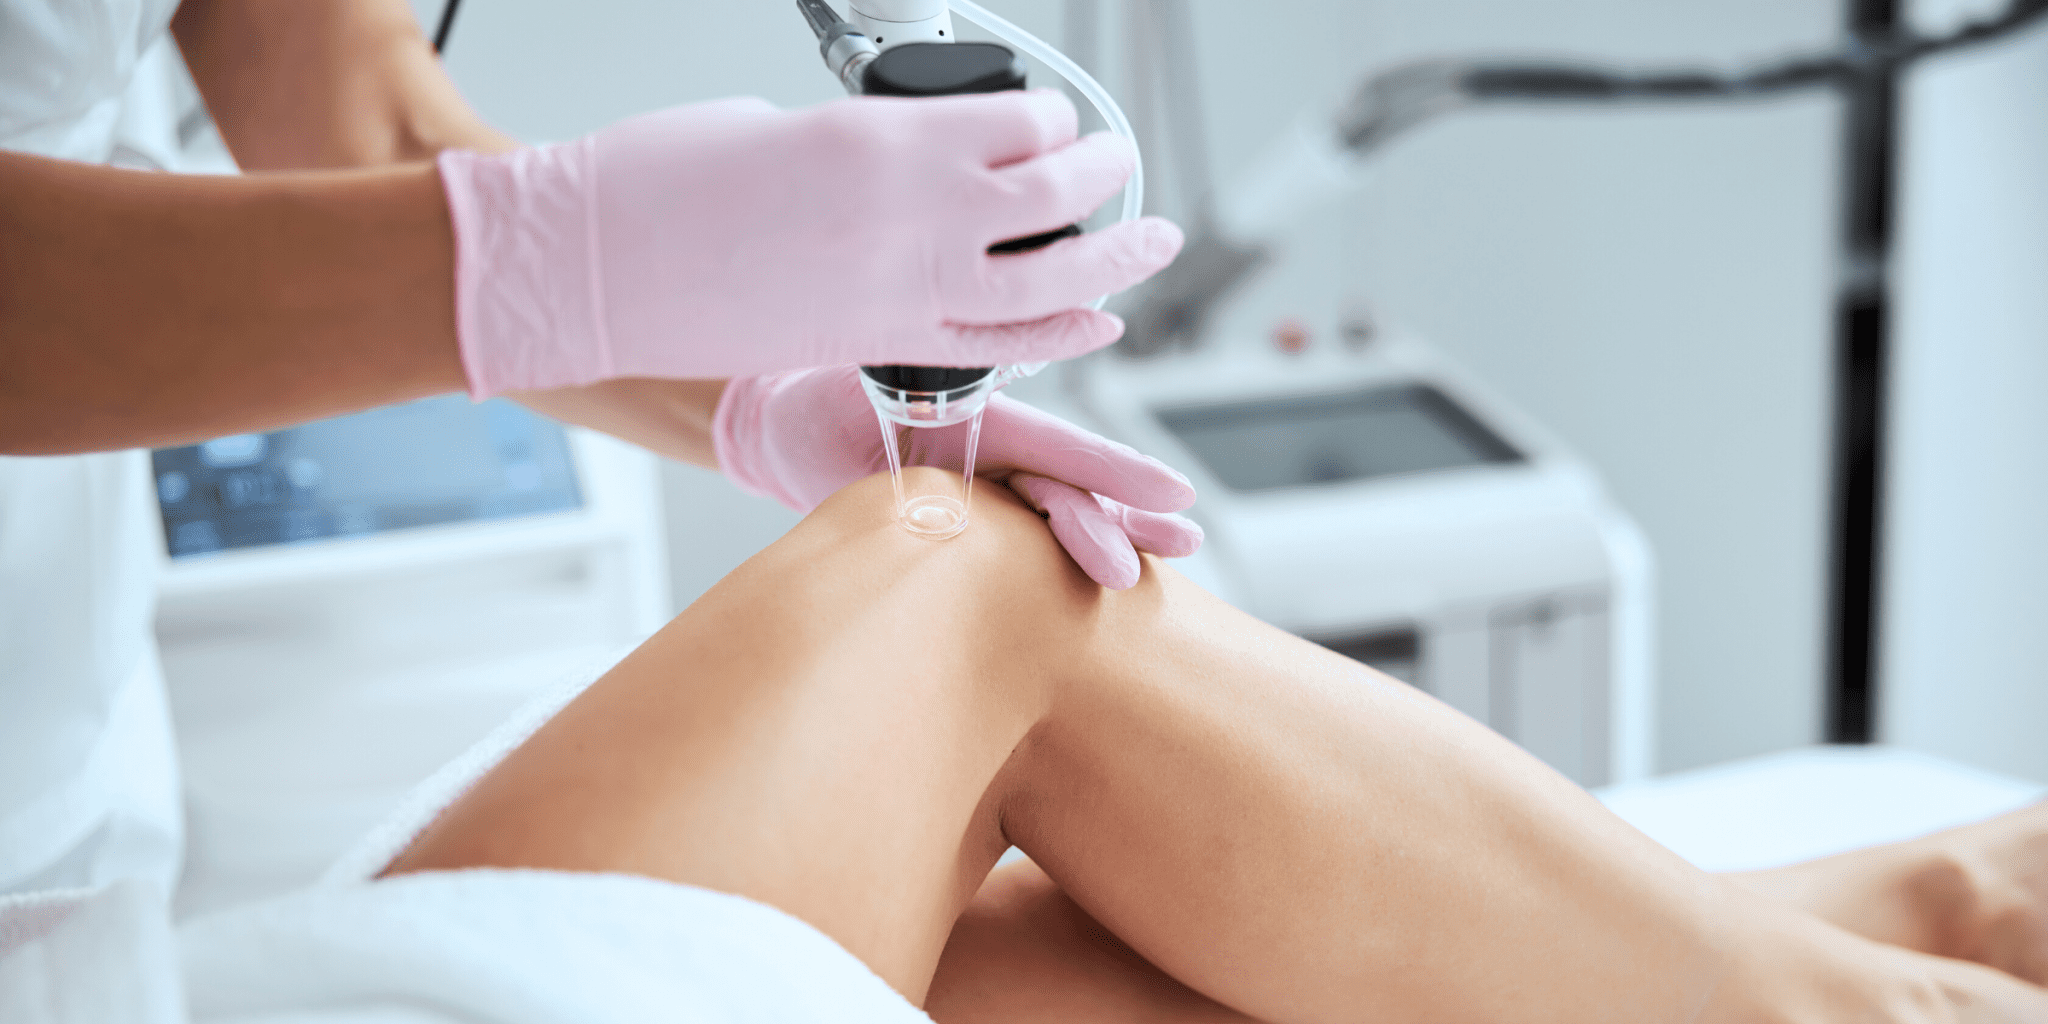 woman receiving Endovenous laser therapy treatment for spider veins